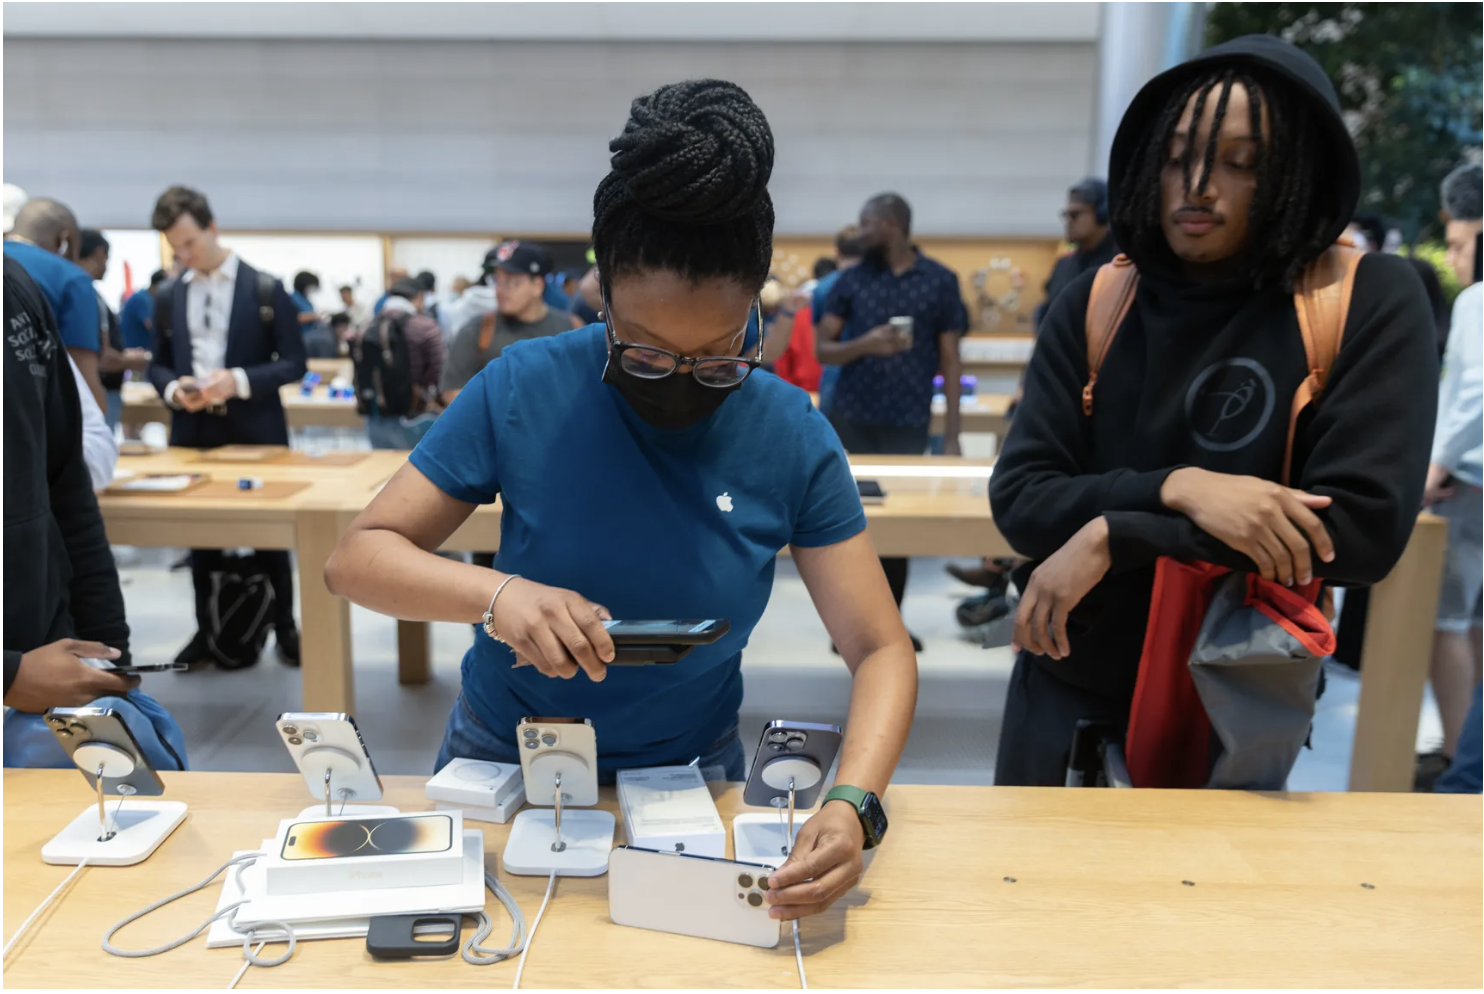 An Apple Store employee helps a customer with an iPhone purchase. Jeenah Moon/Bloomberg via Getty Images